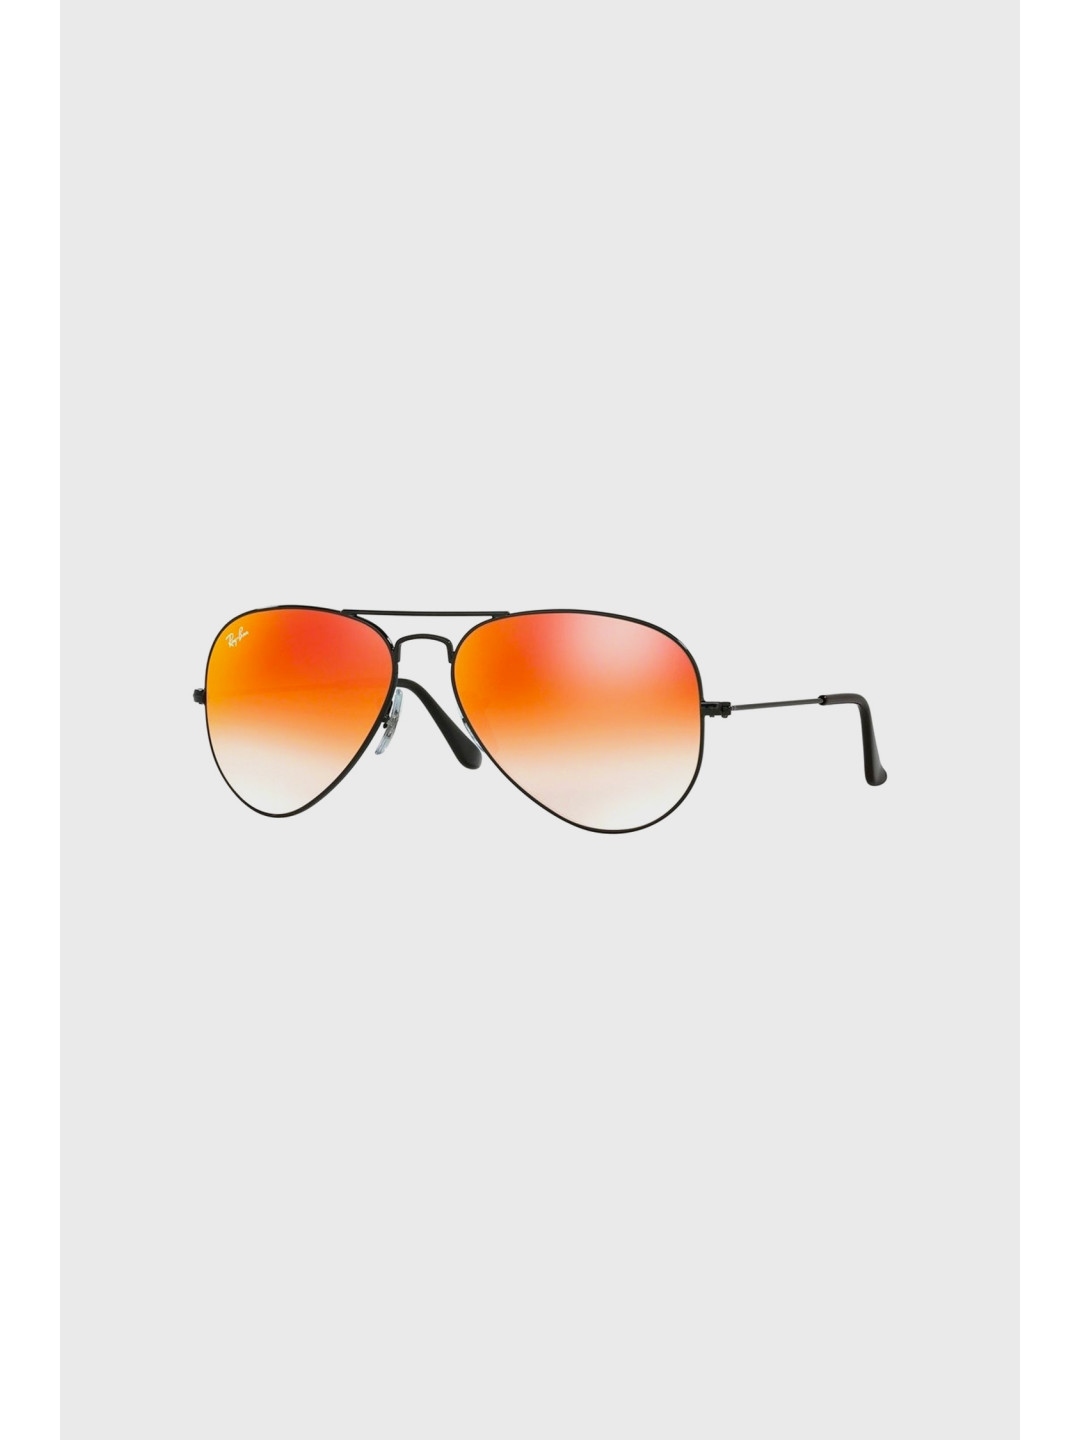 Find Latest Ray-Ban Aviator Black Frame Orange Gradient For men Wholesale  or Retail | by Ray-Ban in Lagos Nigeria | Dexstitches